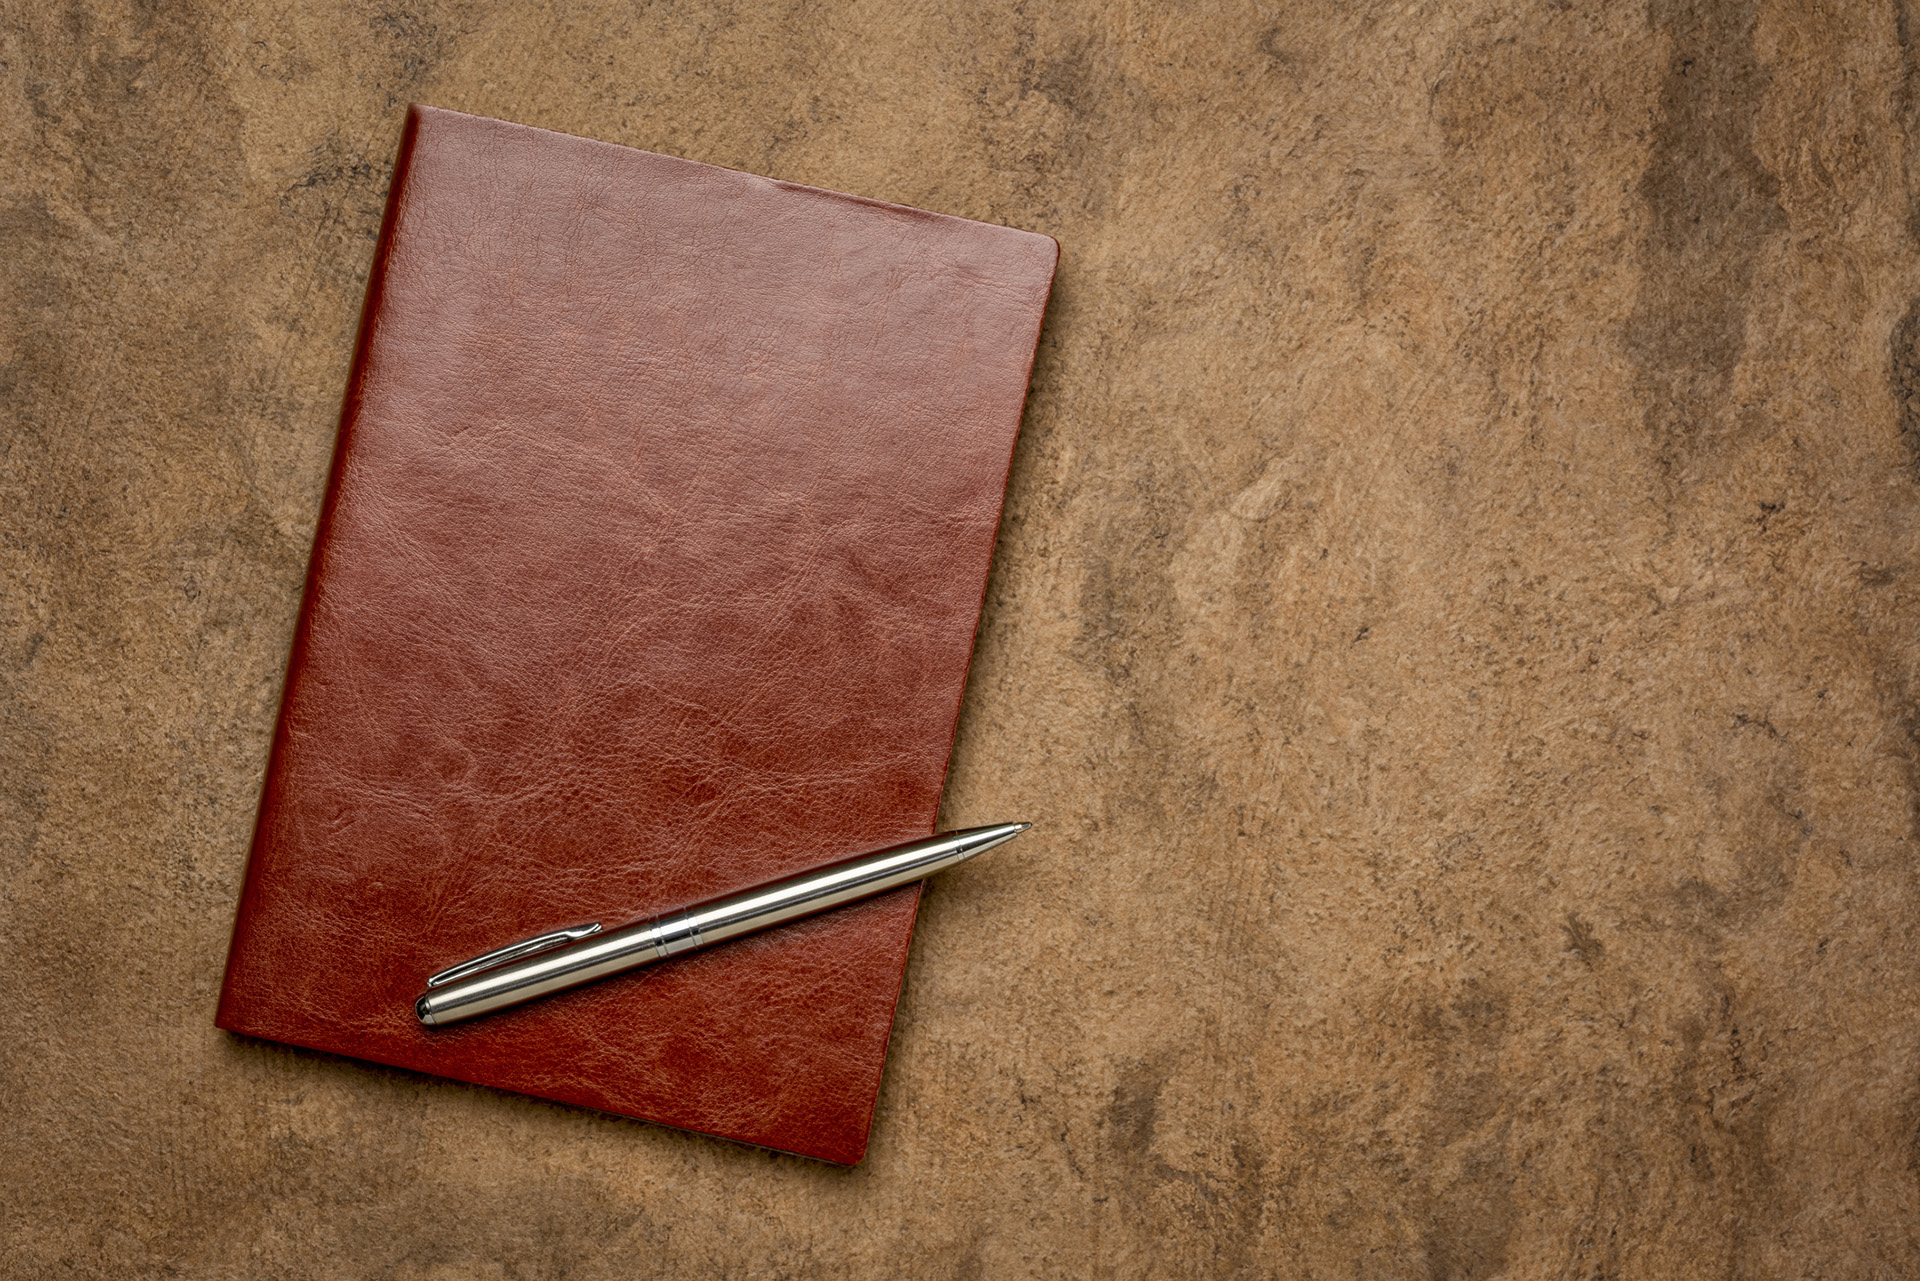 diary, journal or scrapbook in a rich brown leather